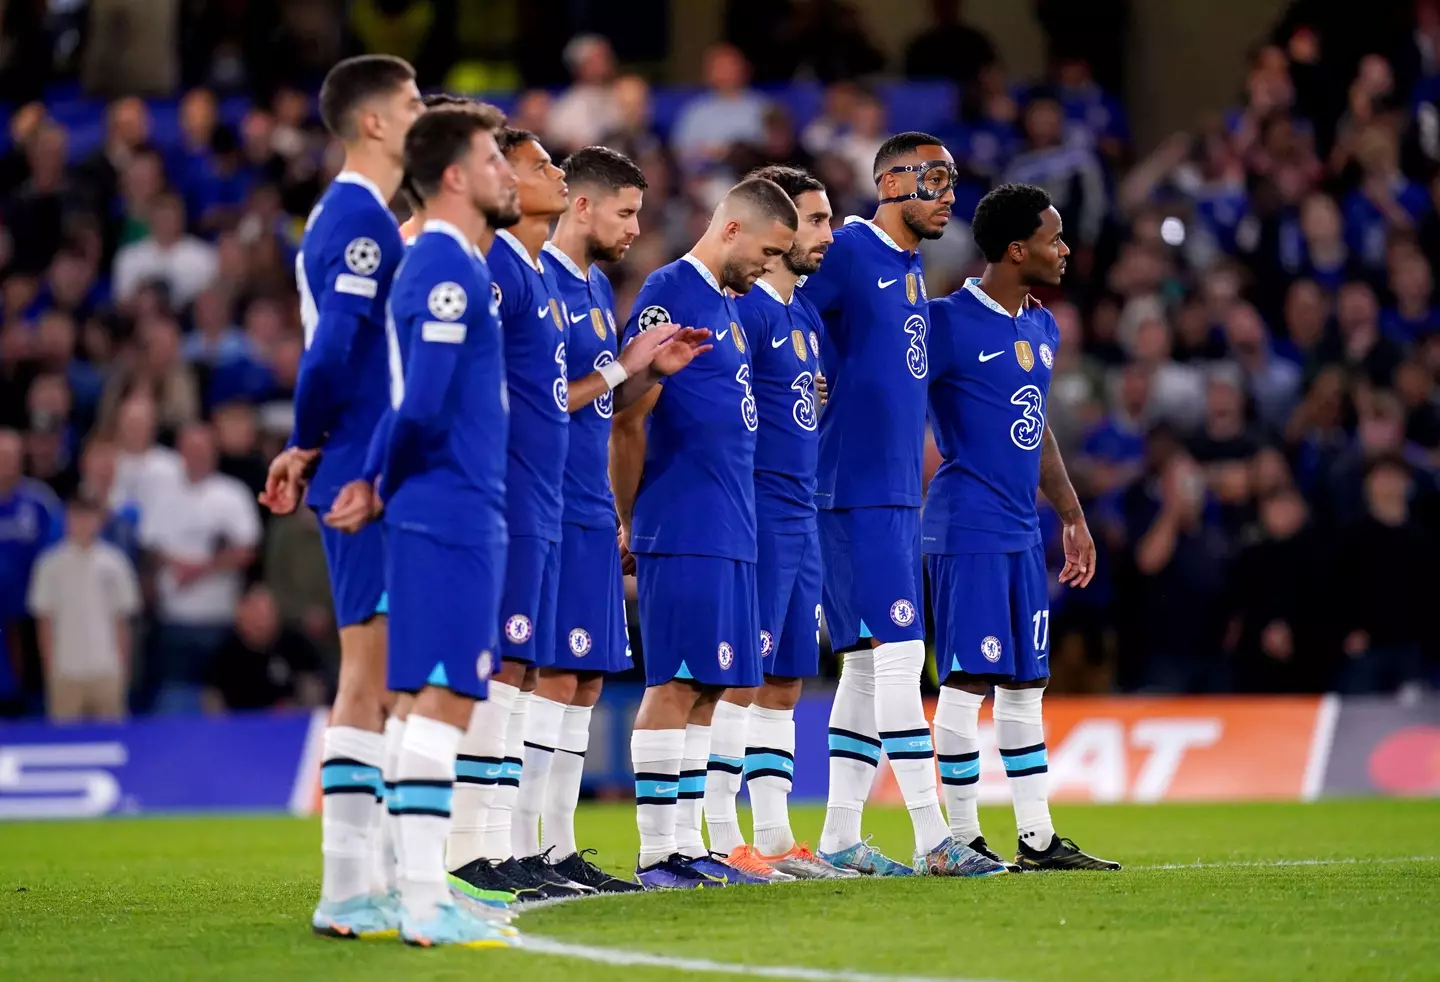 Chelsea players lining-up prepared for kick-off against FC Salzburg. (Alamy)